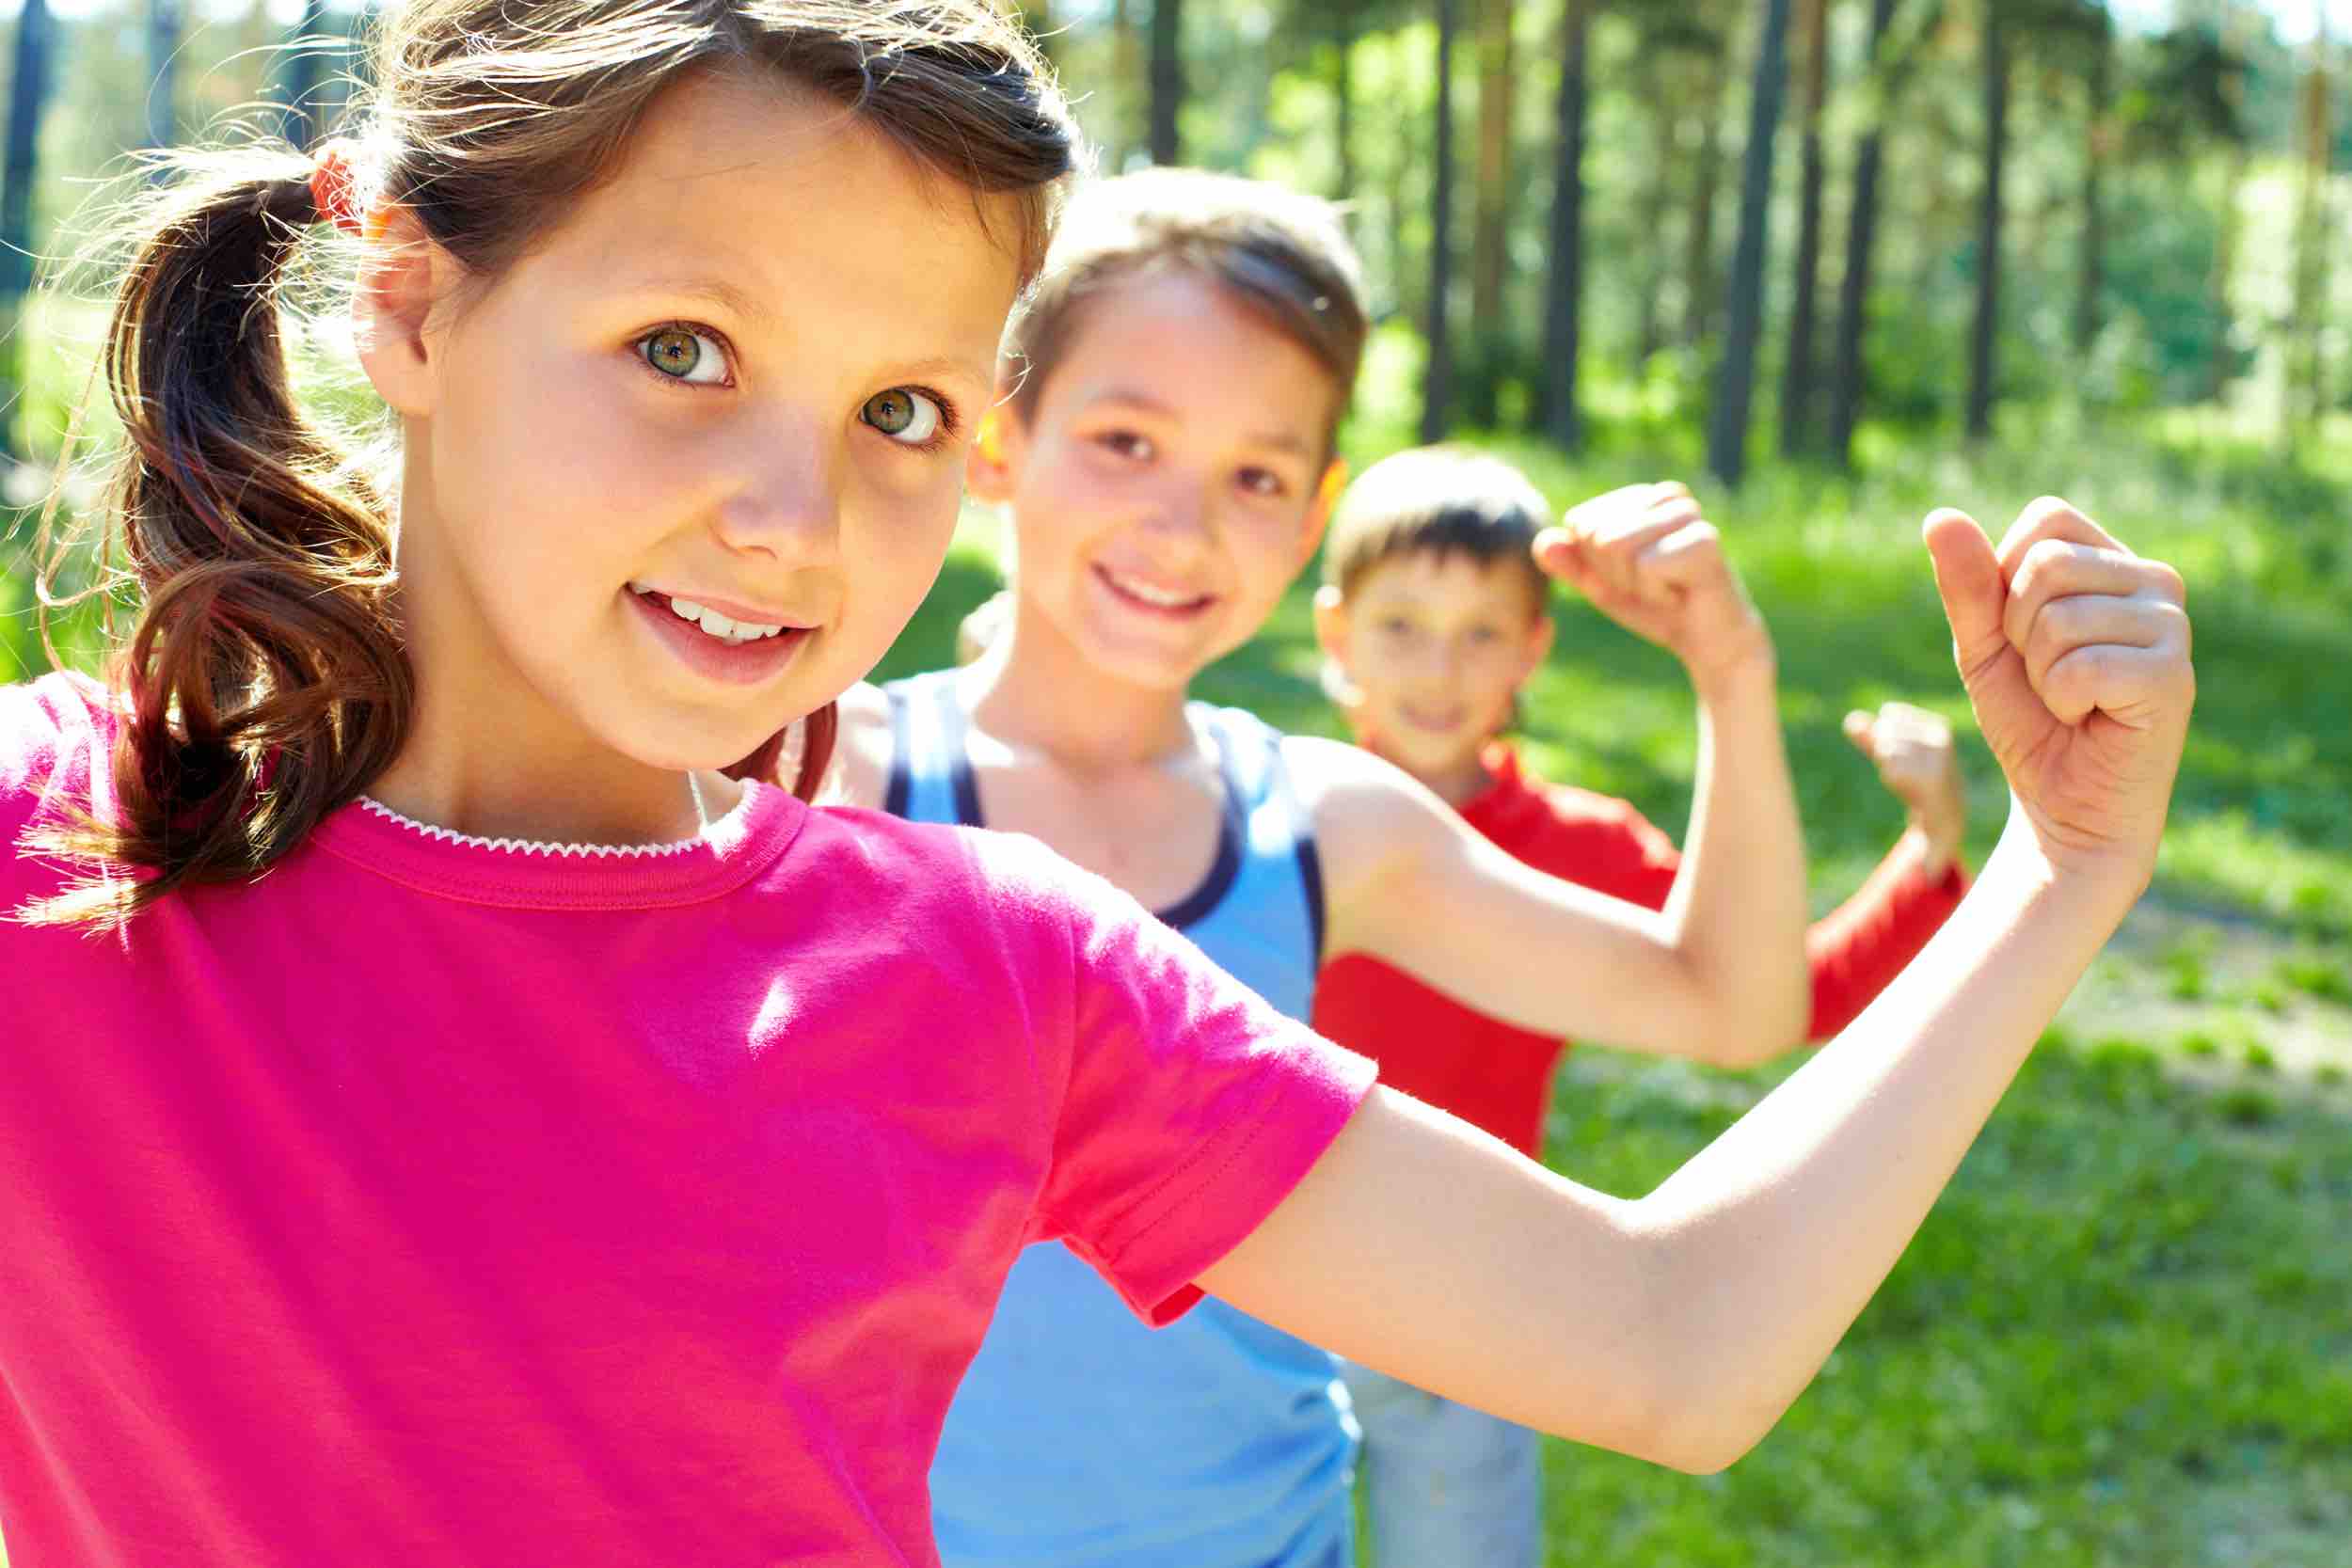 3 kids with left arm up showing off their bicep muscle